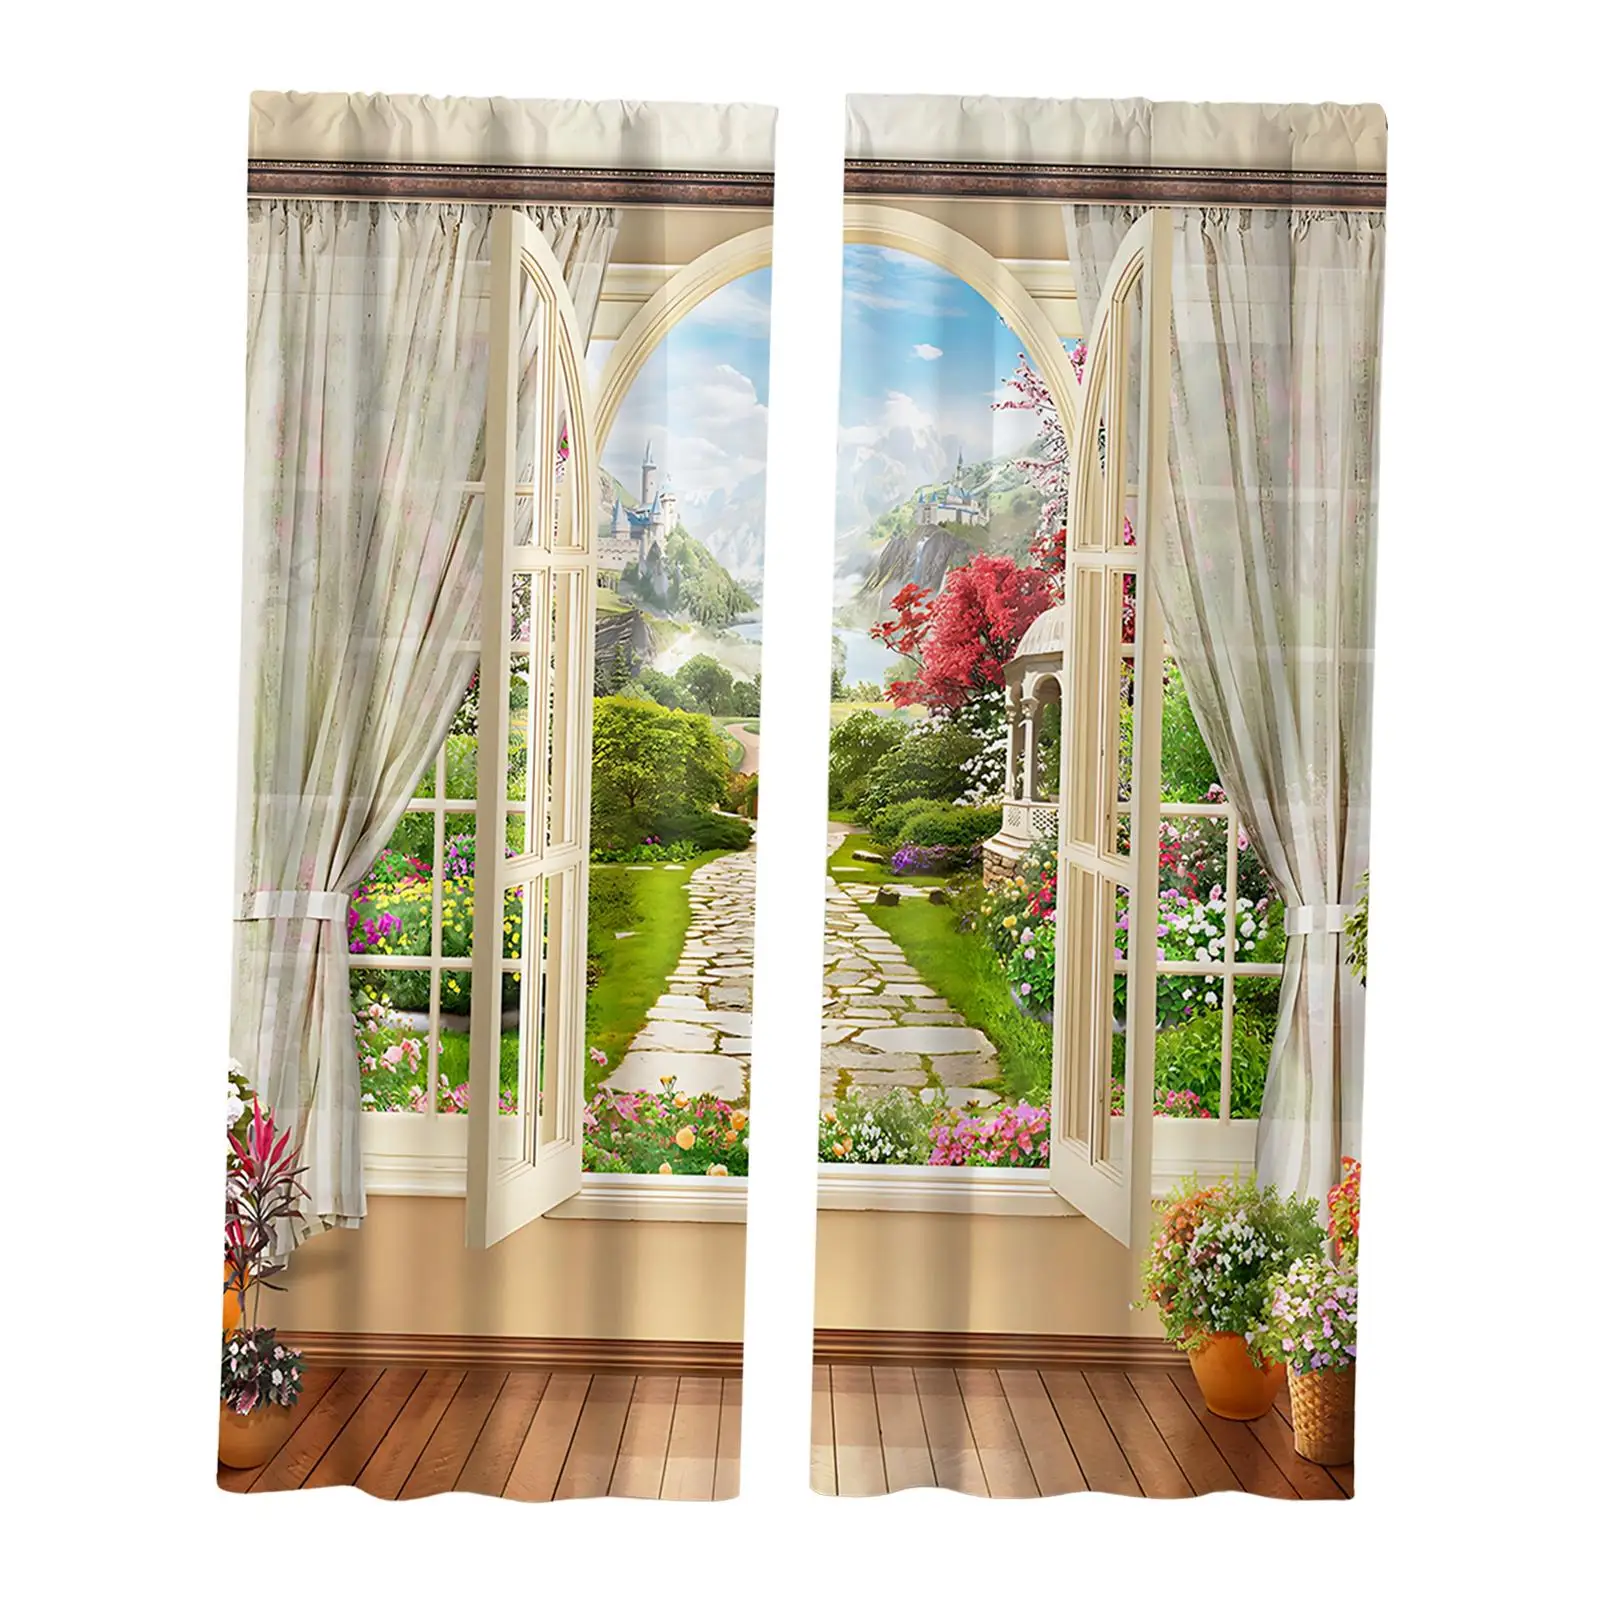 Rustic Window Curtains Decoration Garden Scenery Farmhouse Bedroom Drapes Curtain for Bedroom Living Room Kitchen Bathroom